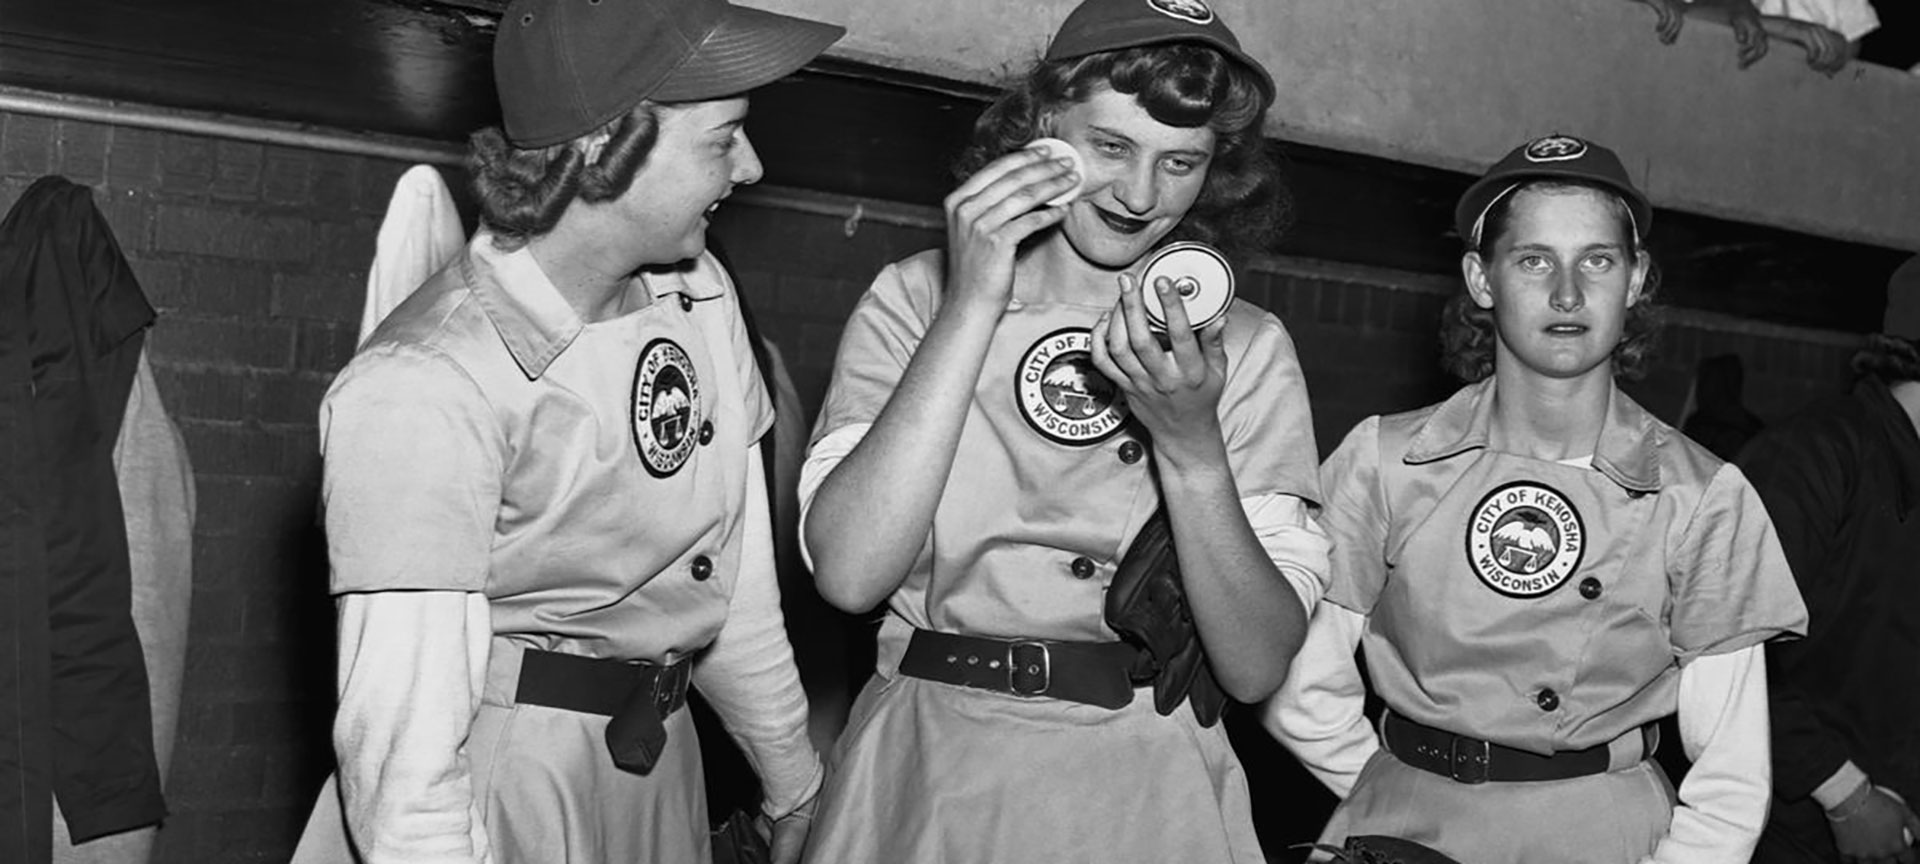 Three female baseball players from the Kenosha Comets in the dugout, with one applying makeup from a compact